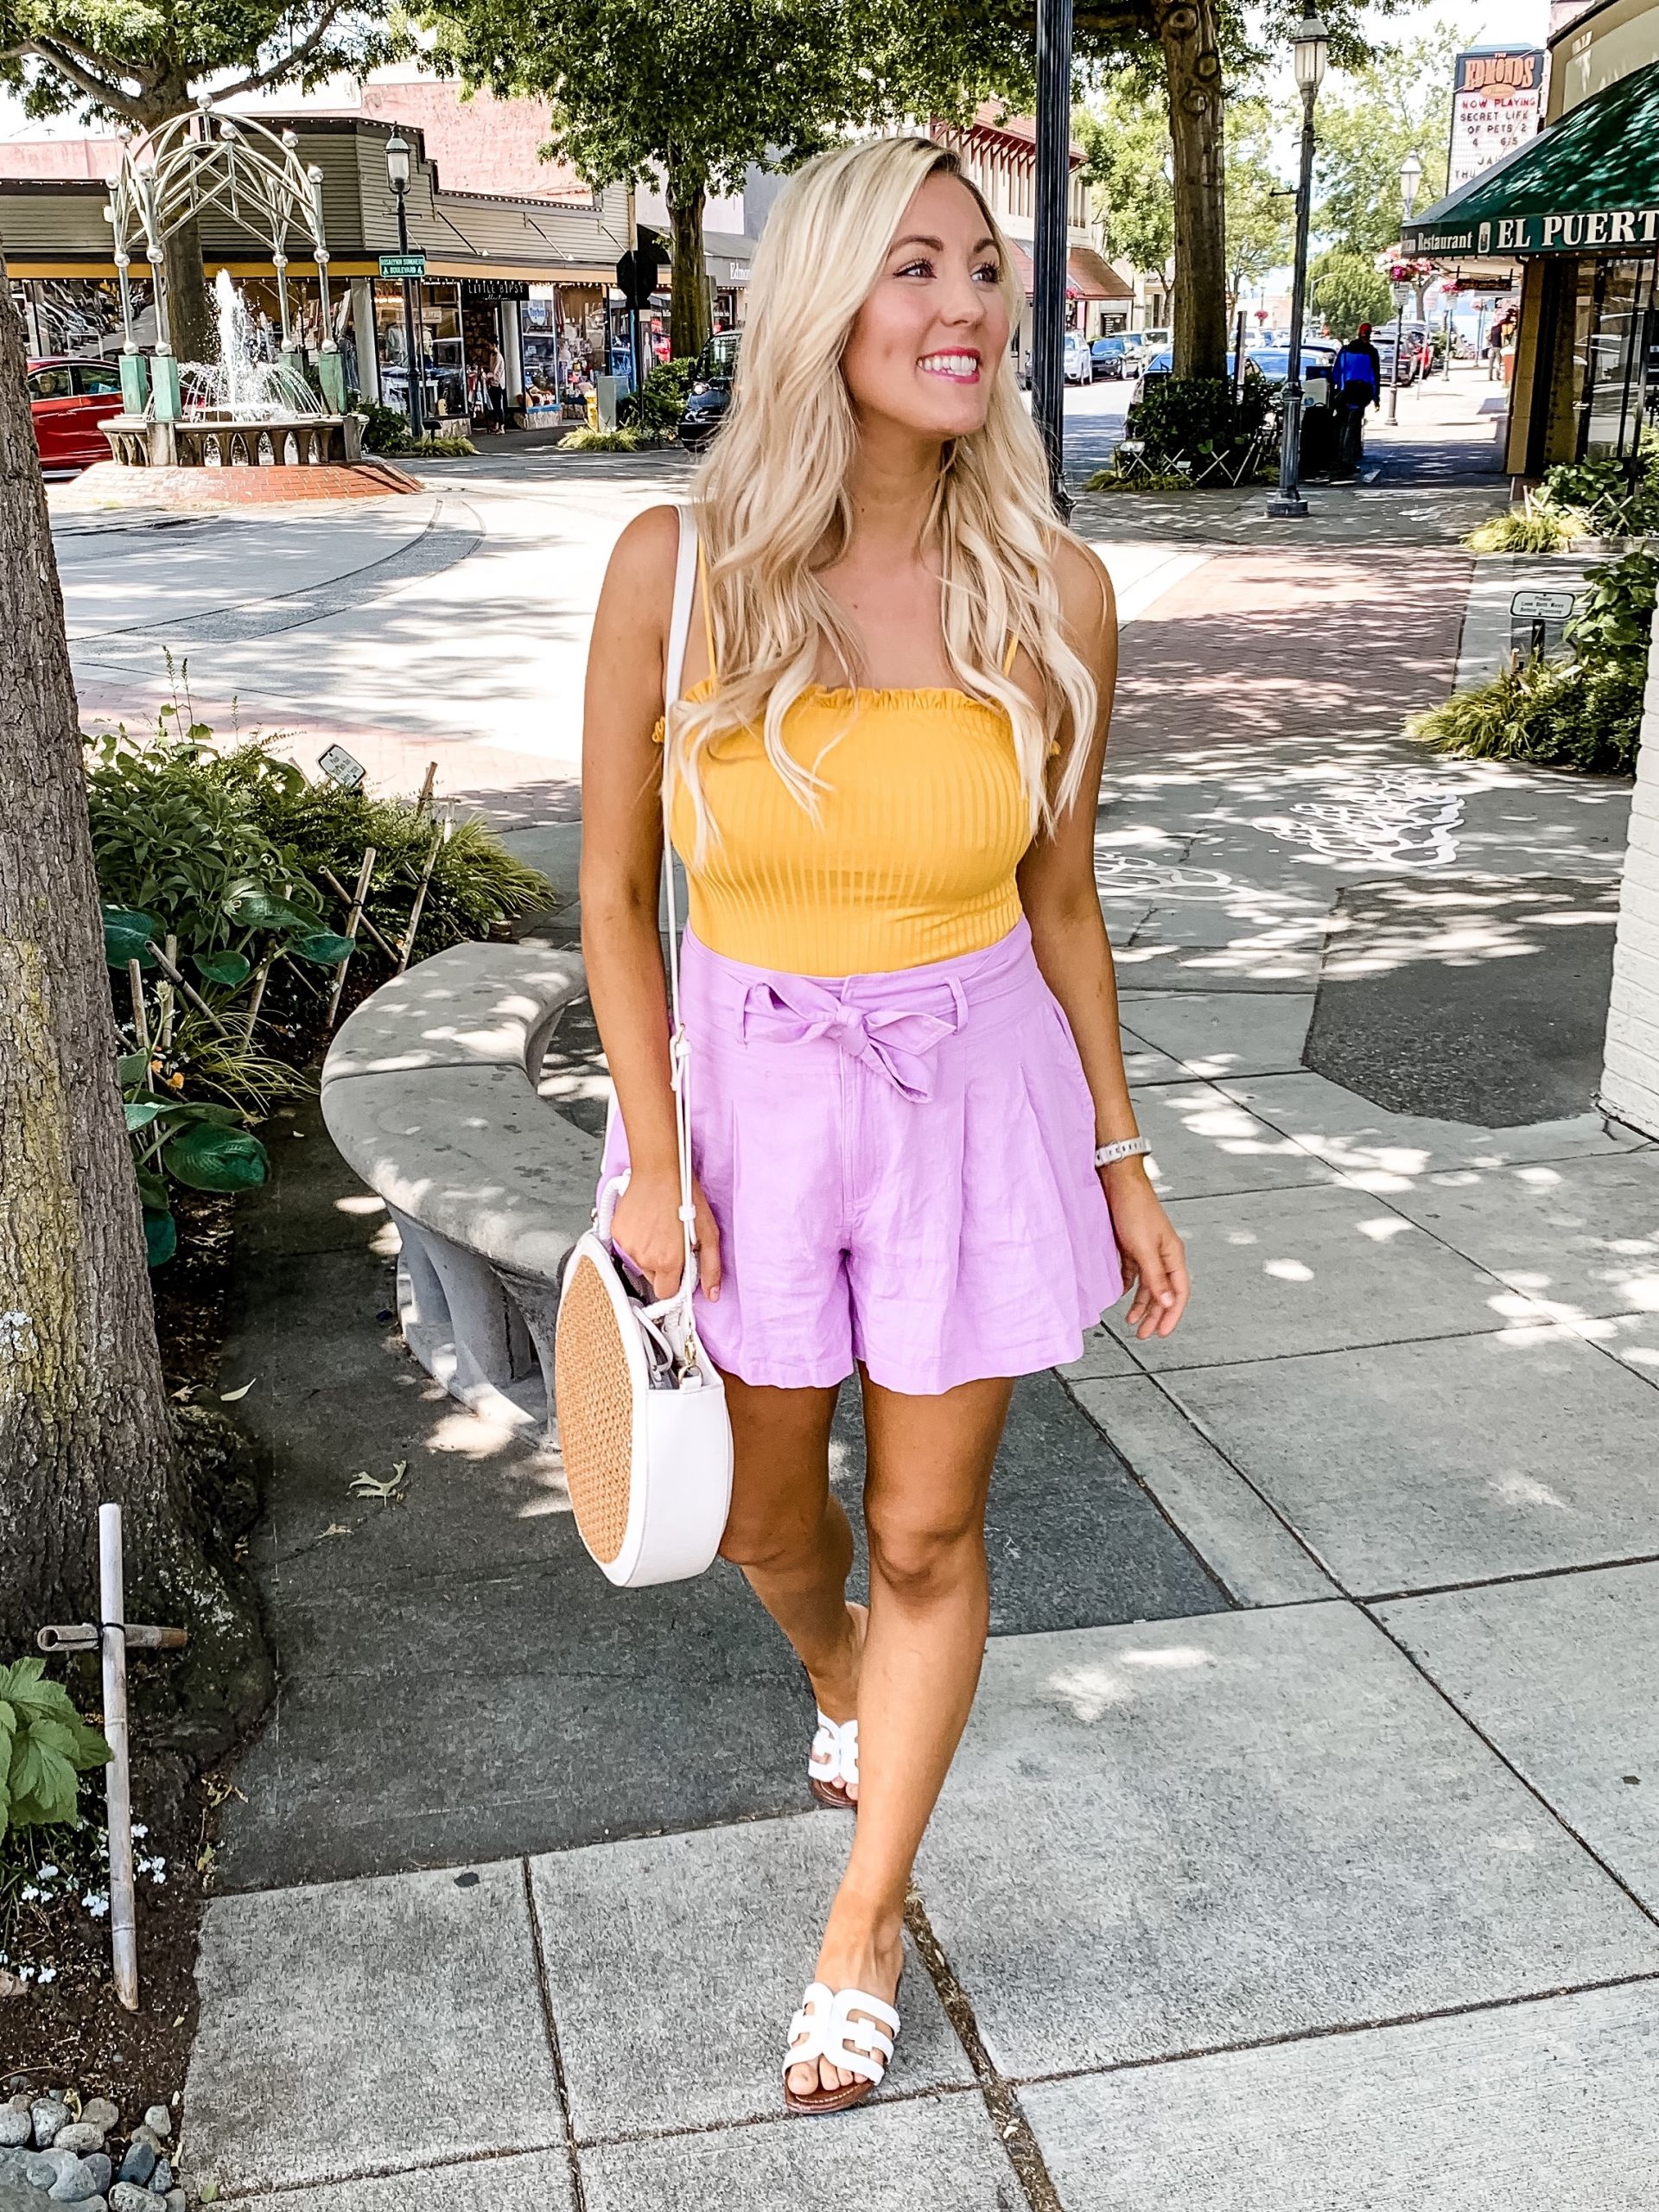 Styling tips for wearing an off-the-shoulder dress with big busts